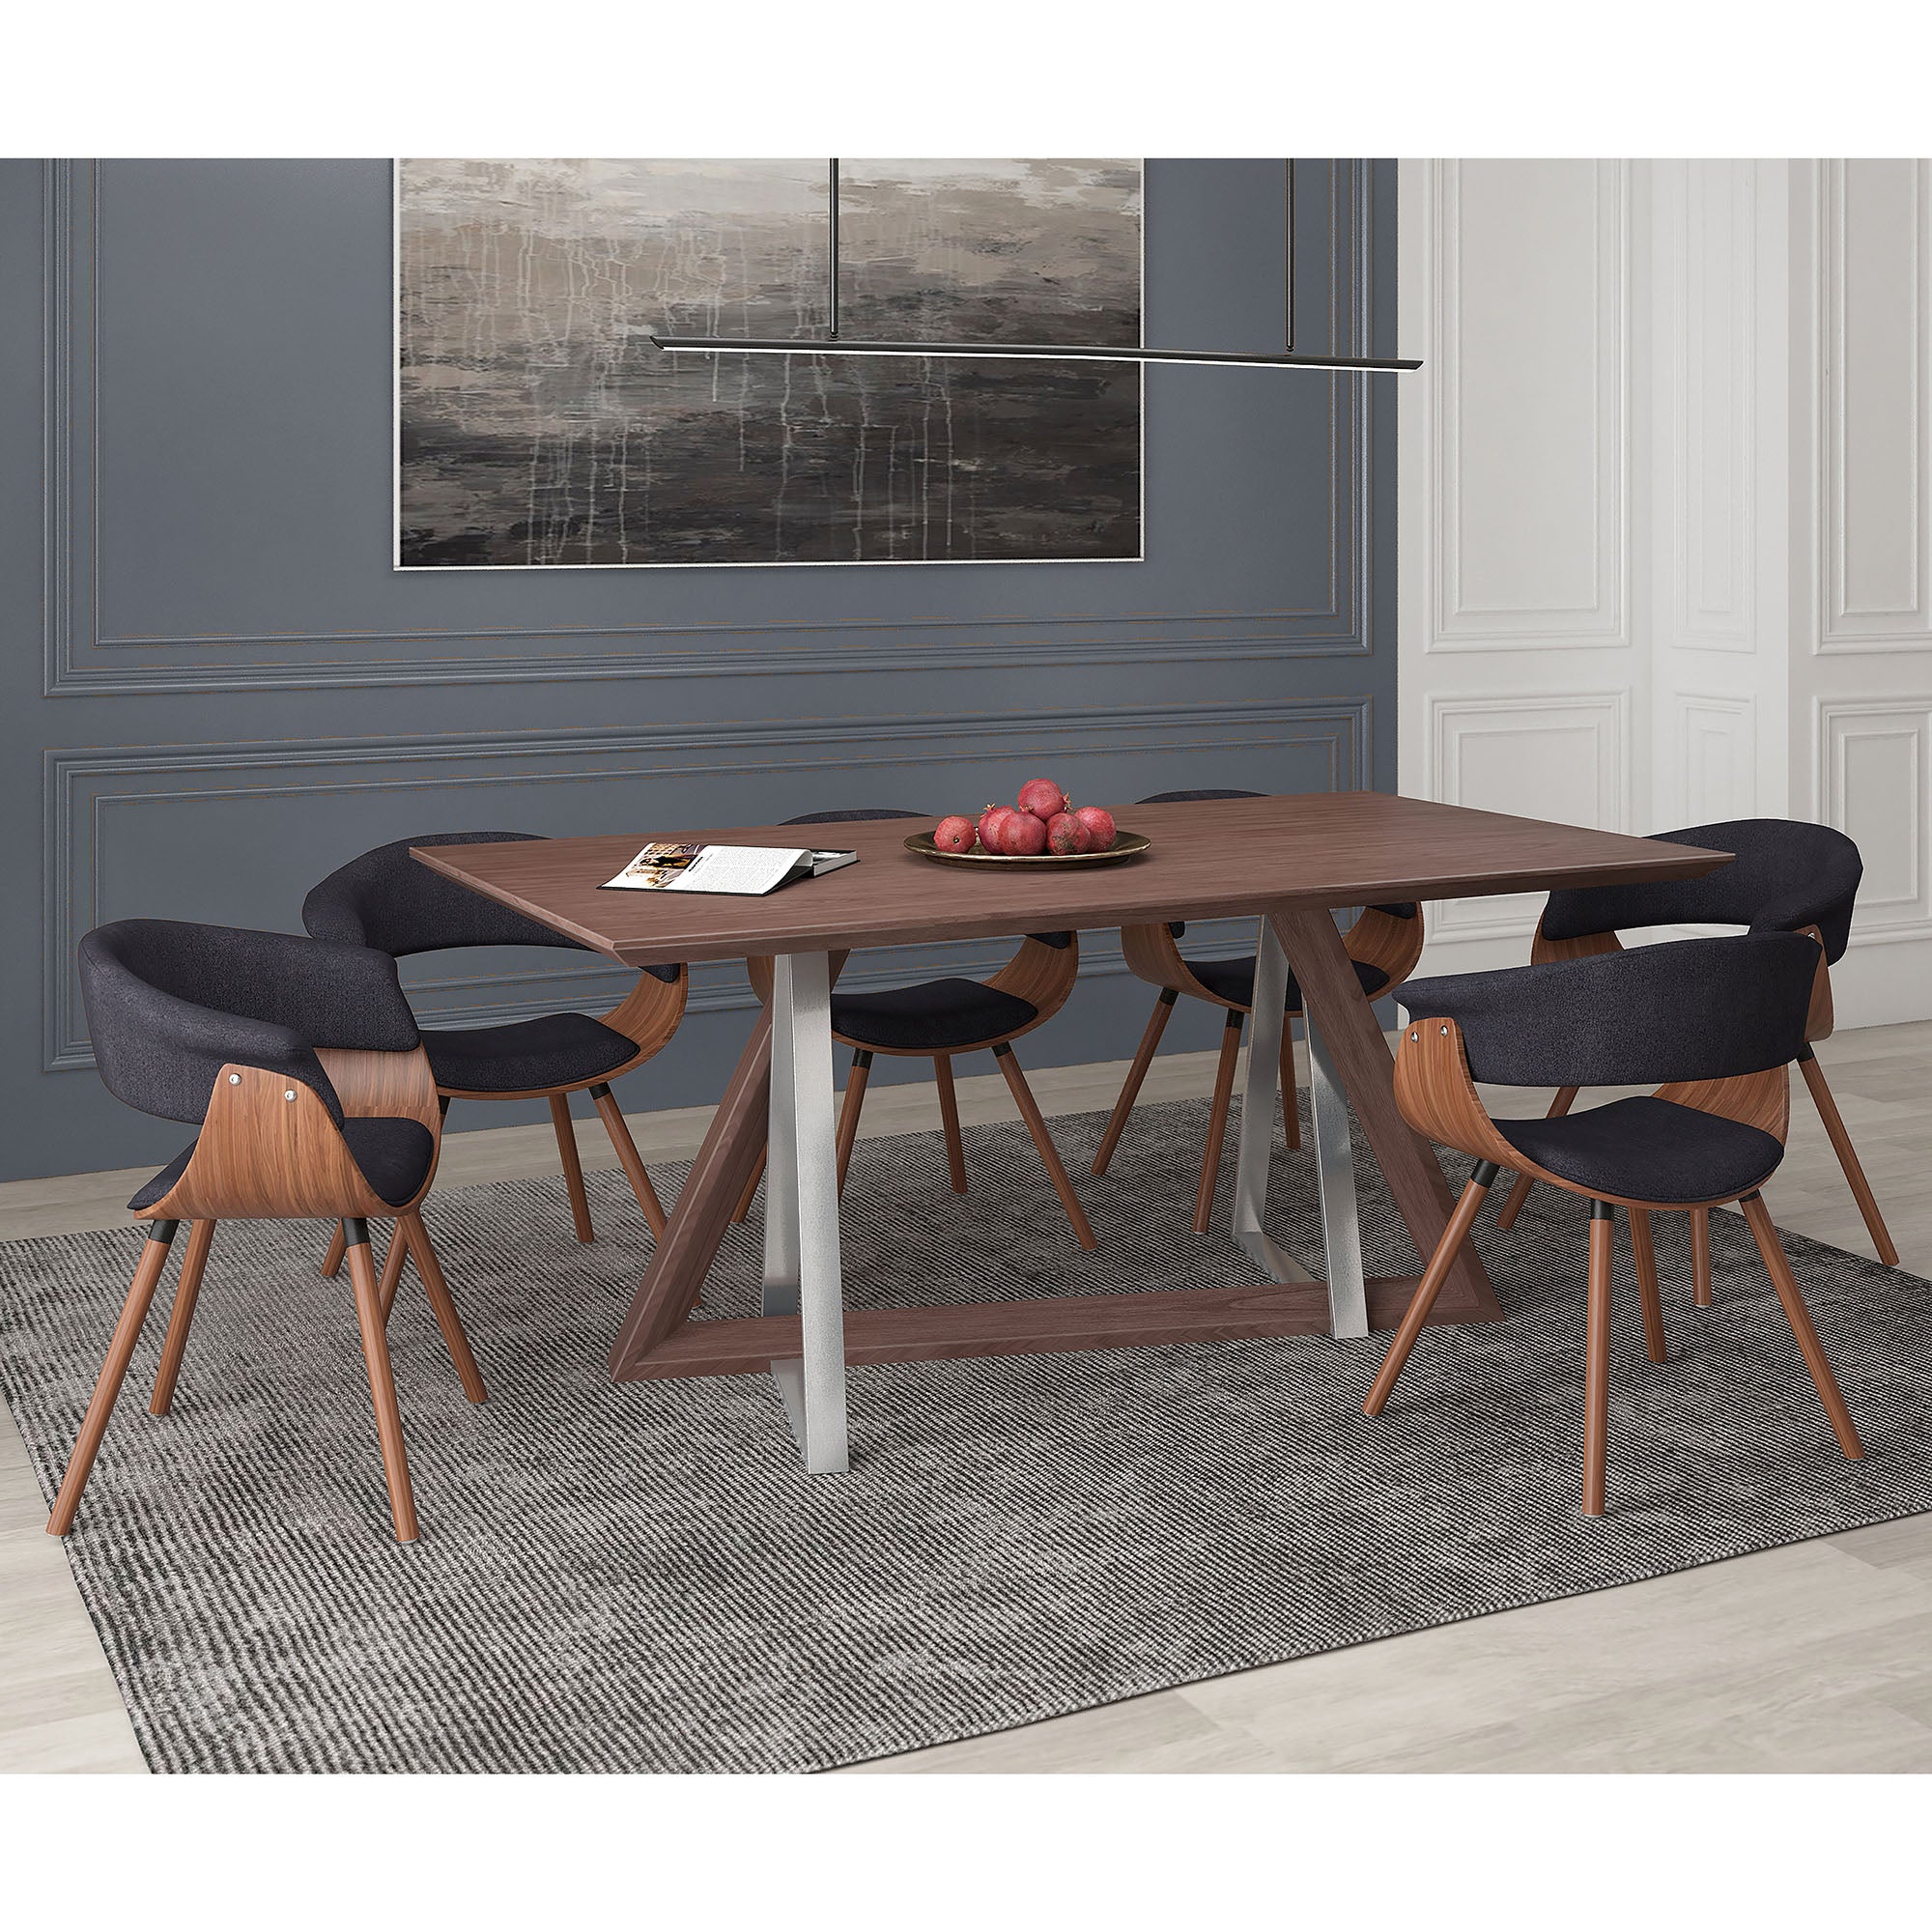 DRAKE 71" DINING TABLE / HOLT CHAIRS - 7PC DINING SET